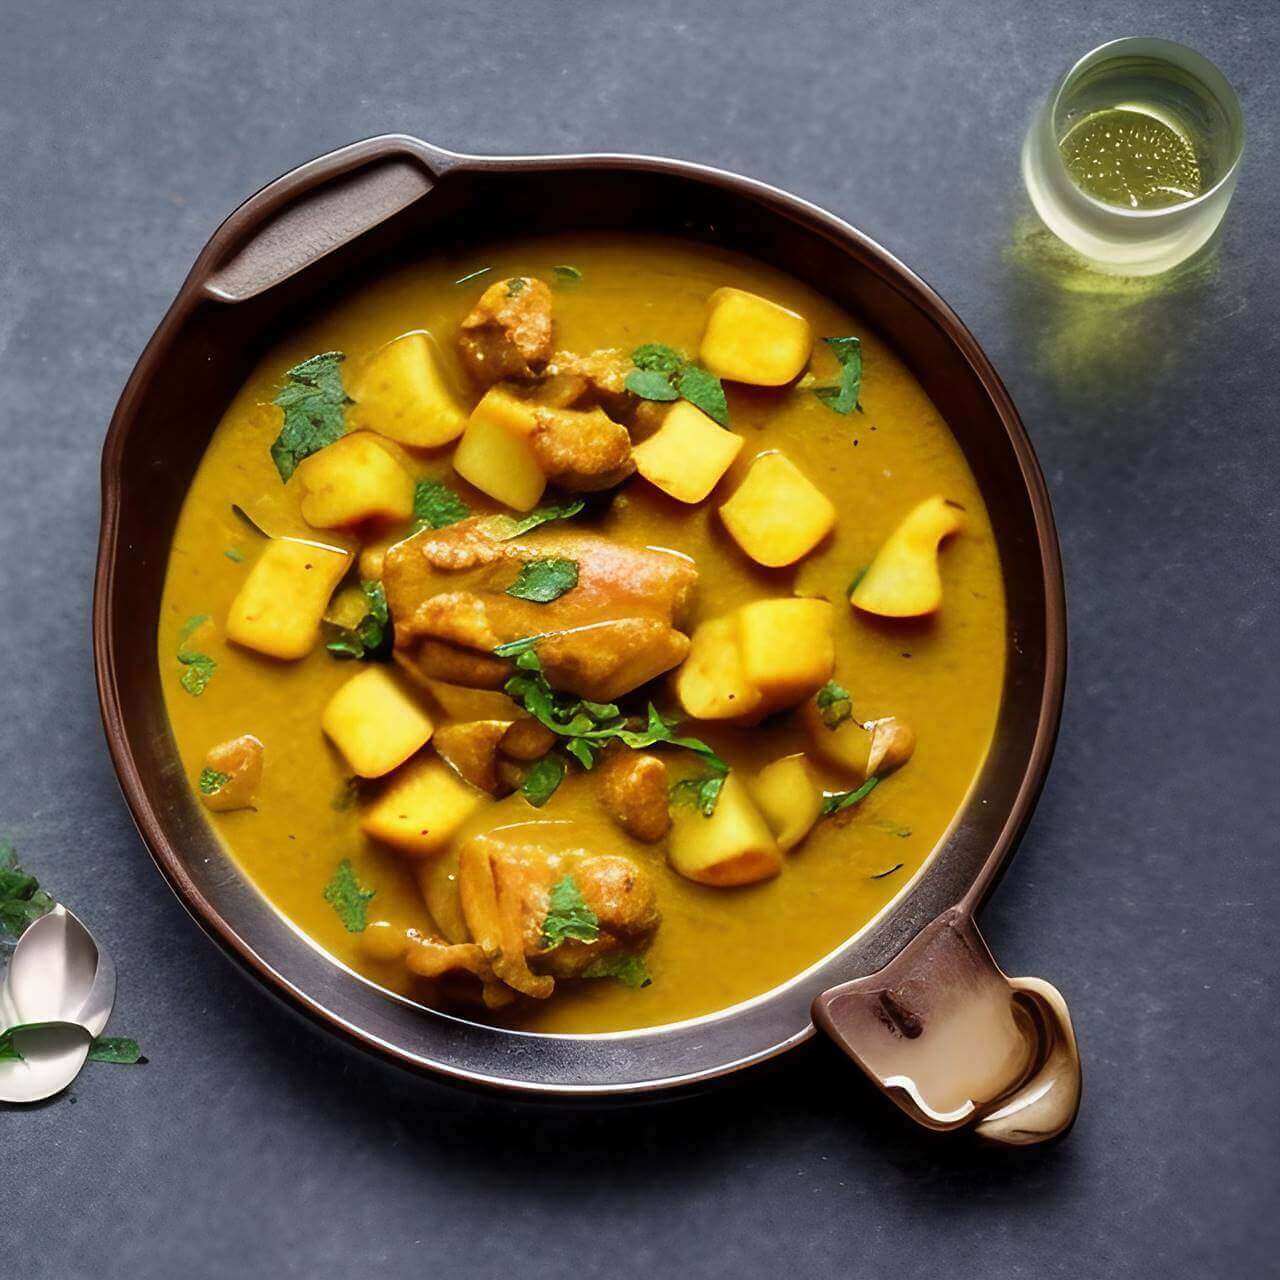 Pinoy-Style Chicken Curry Recipe